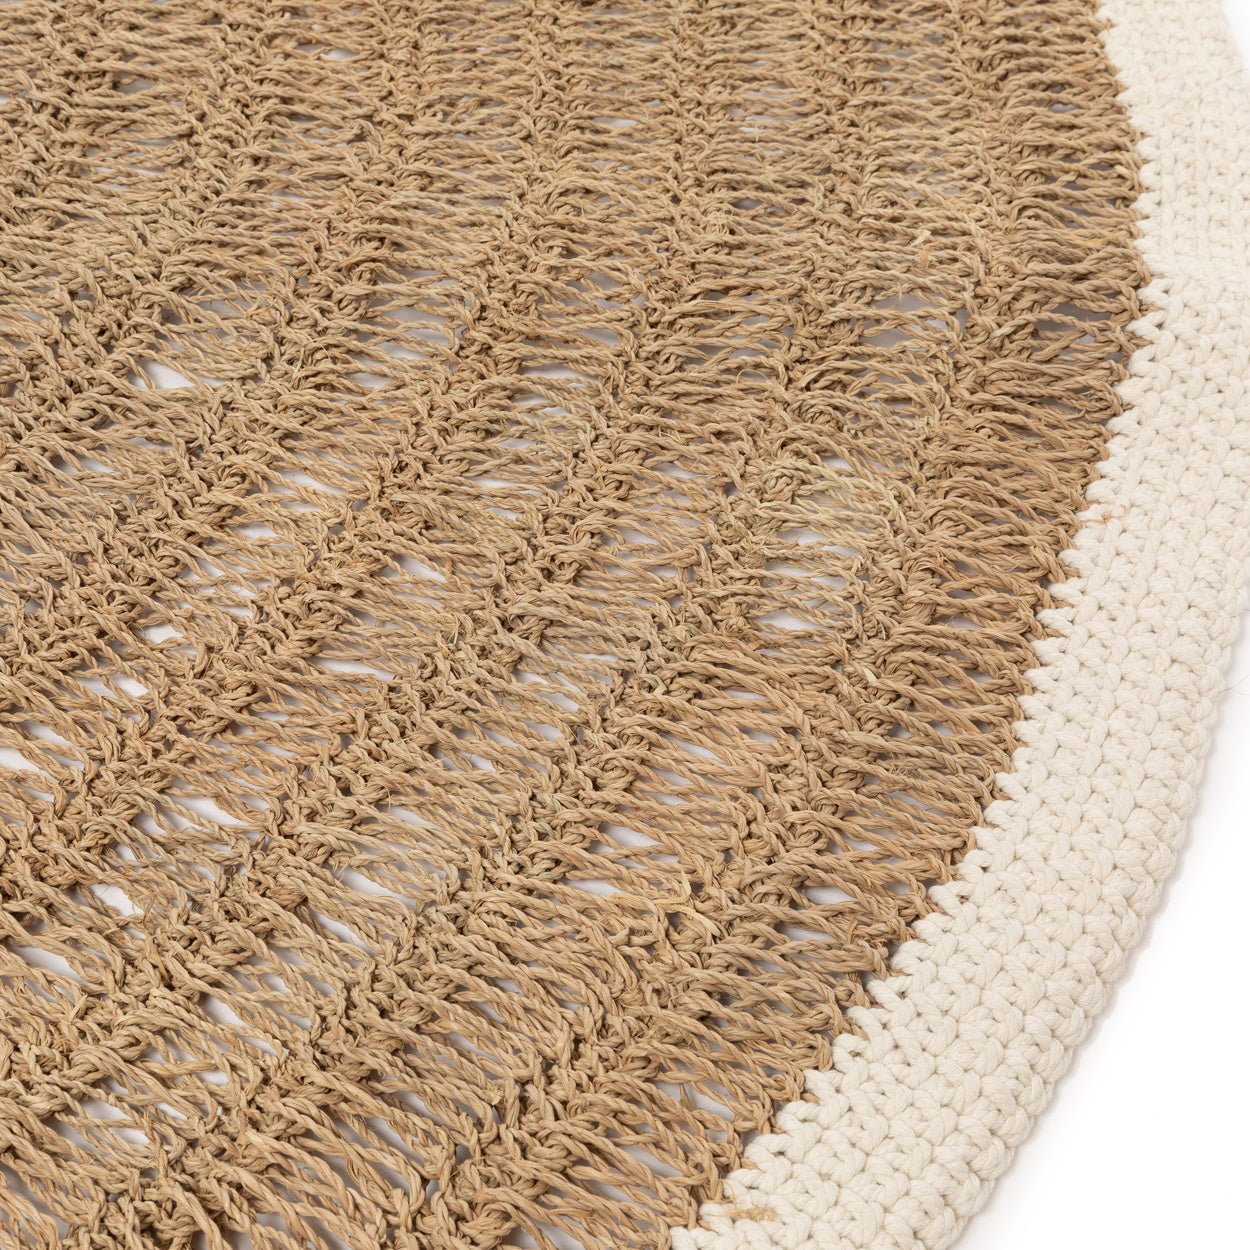 The round seagrass and cotton carpet - Natural white - 150